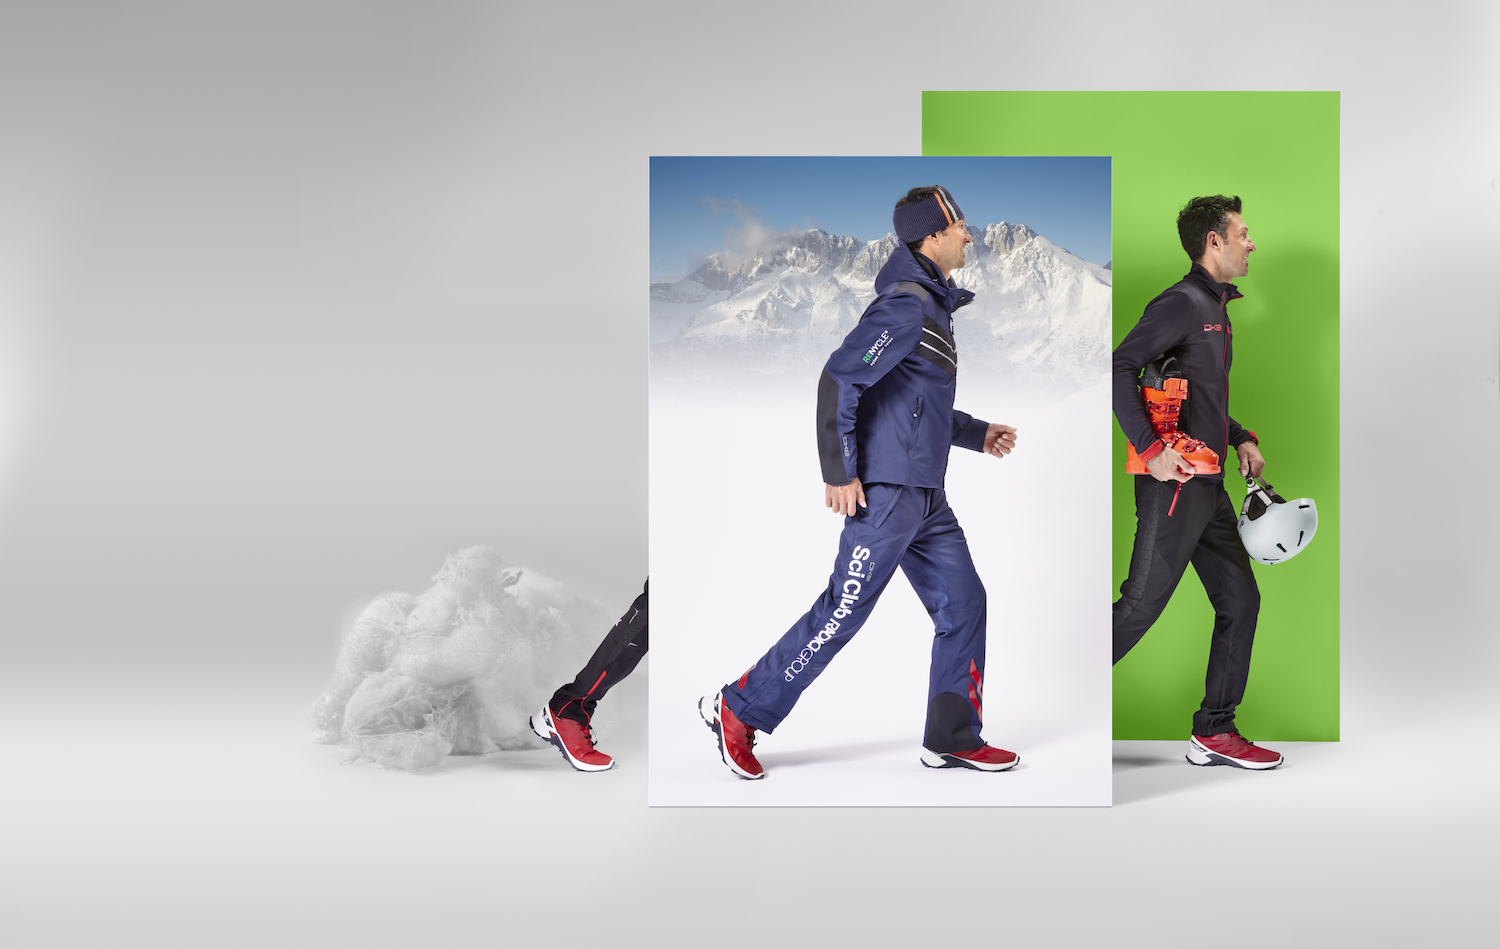 The recyclable ski suit, made of recycled materials. © Filo